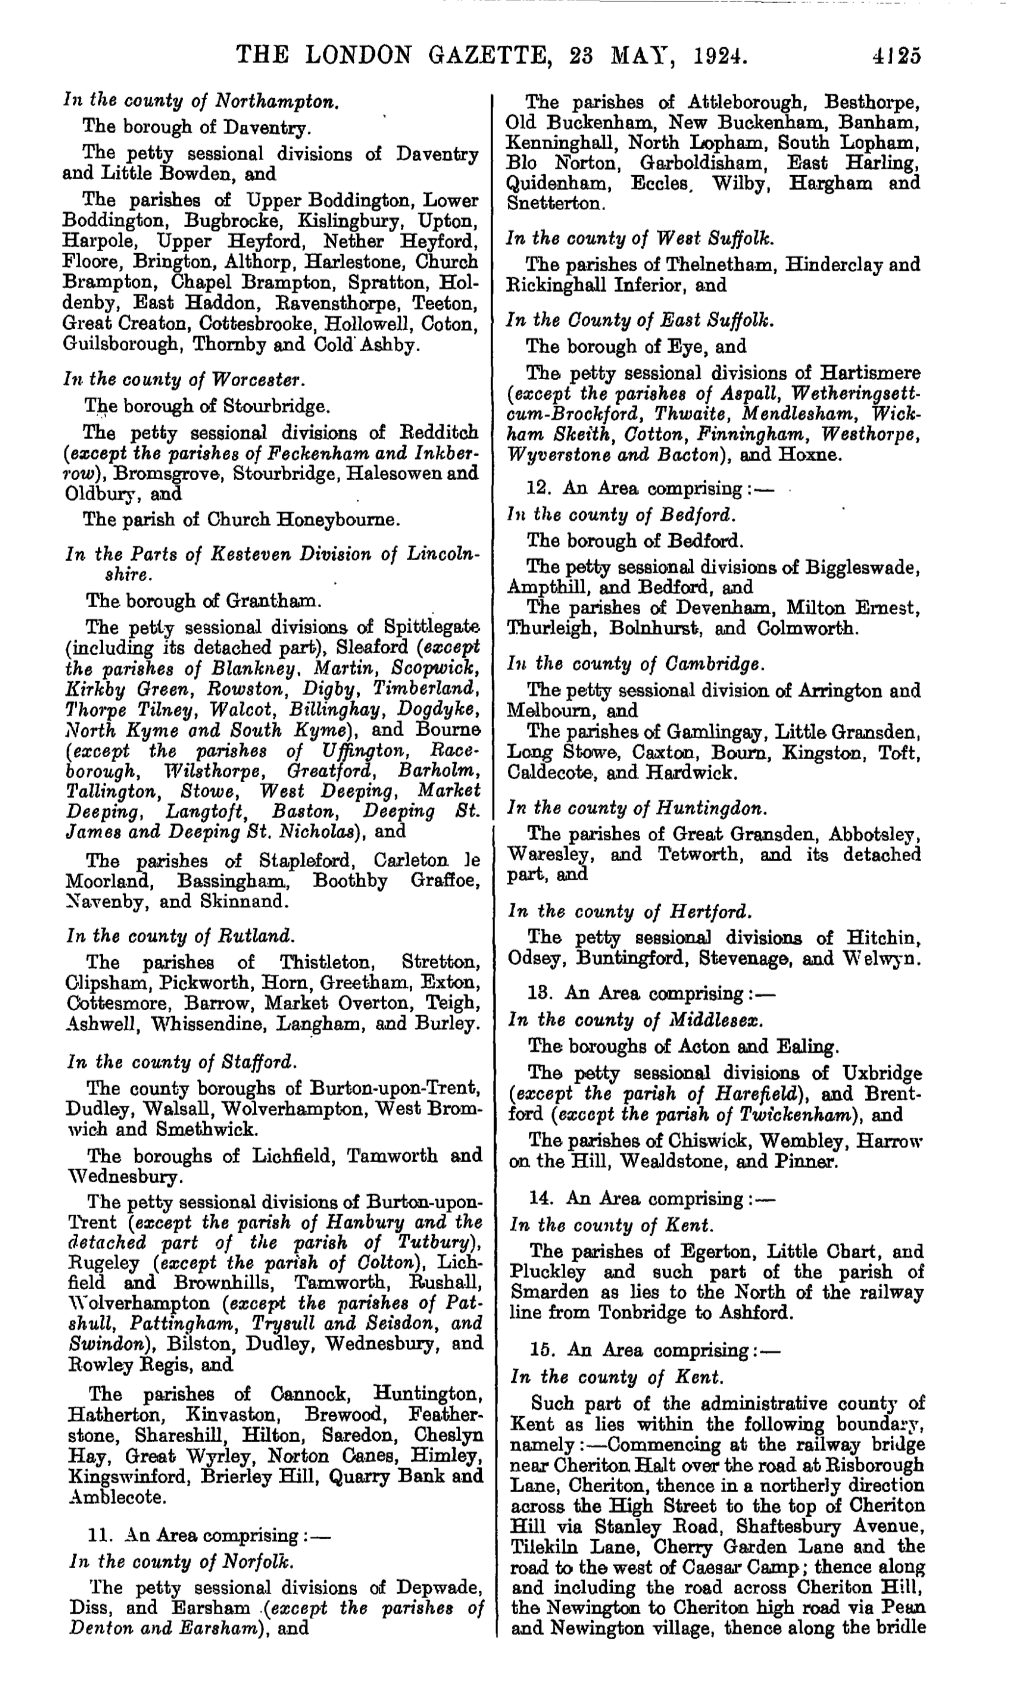 The London Gazette, Issue 32938, Page 4125